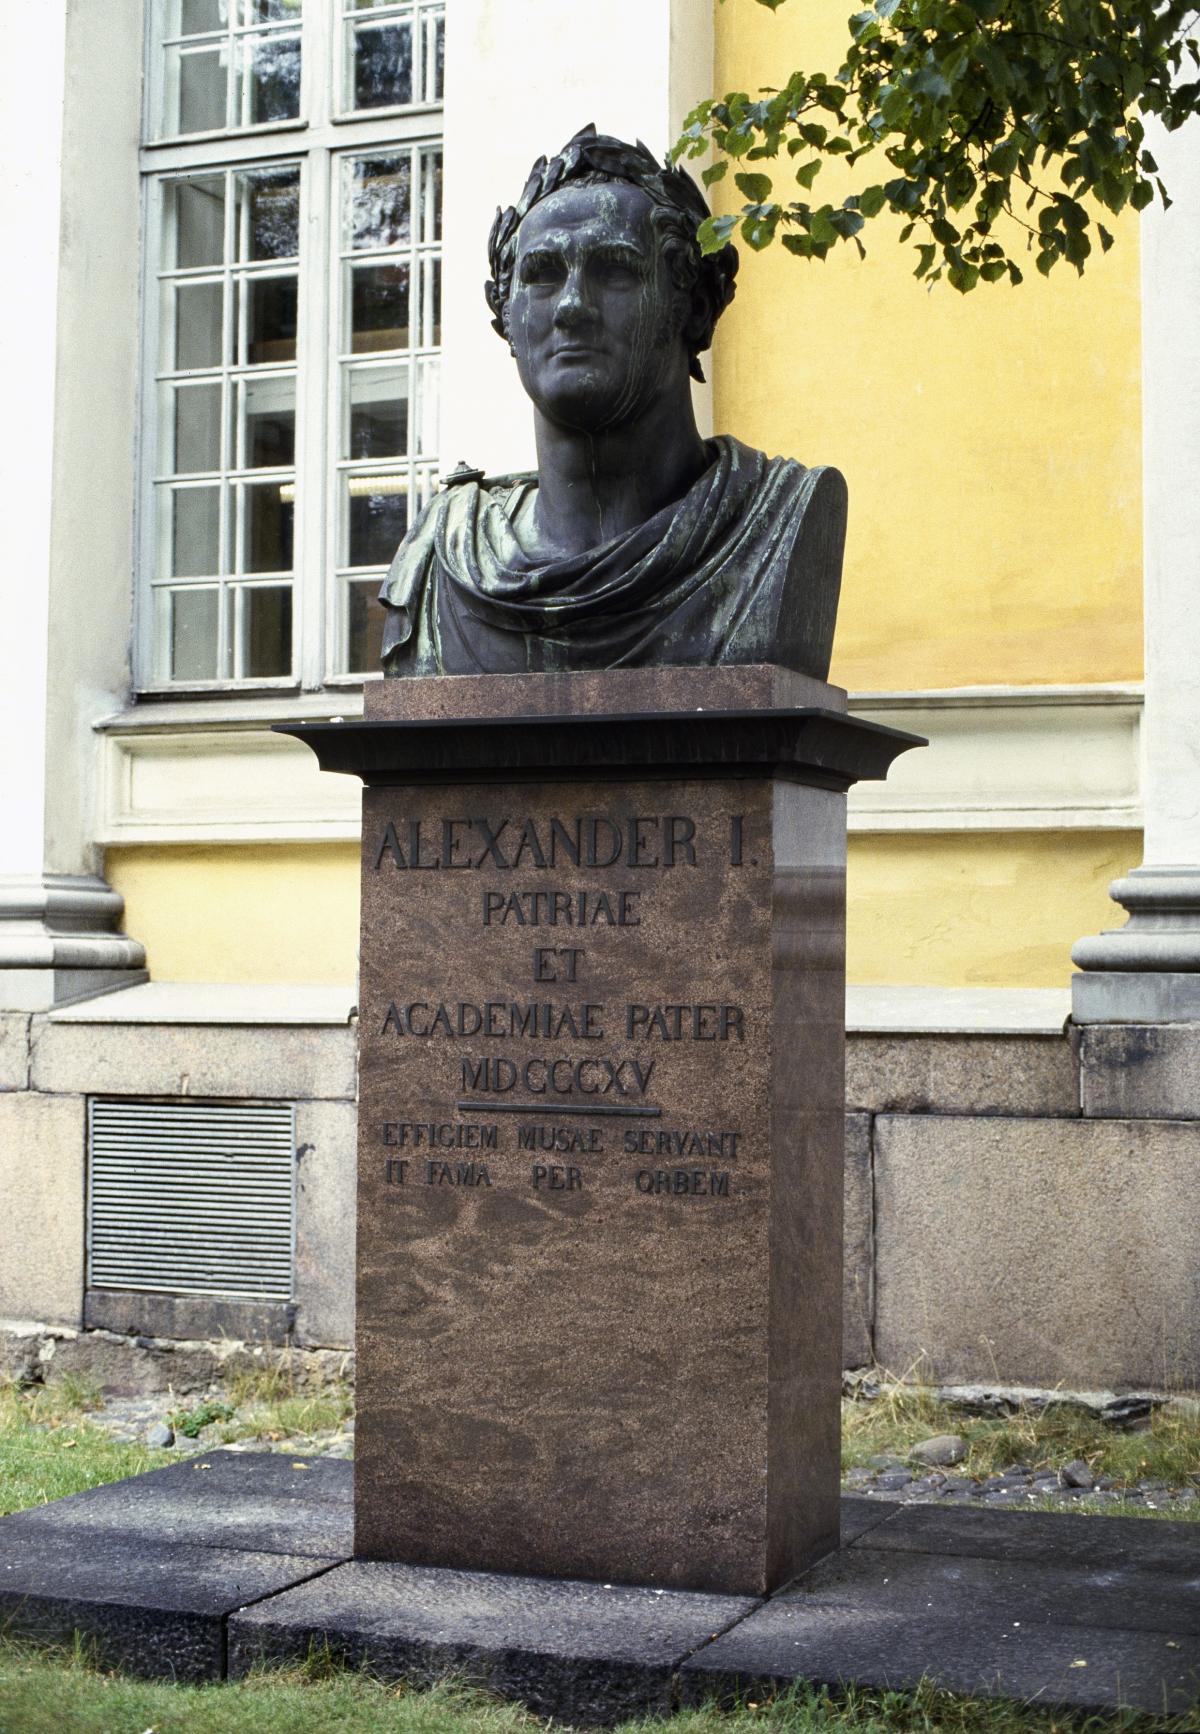 Bust of Emperor Alexander I in the courtyard of the University of Helsinki library. The bust was sculpted by the Russian artist Ivan Martos. The sculpture was first placed in the main hall of the Imperial Academy of Turku in 1814, from where it was transferred in 1832 to the festive hall of the brand new University of Helsinki. Today, the statue is in storage at the Helsinki University Museum and its new location has not been decided. Photo: Helsinki City Museum / Jan Alanco